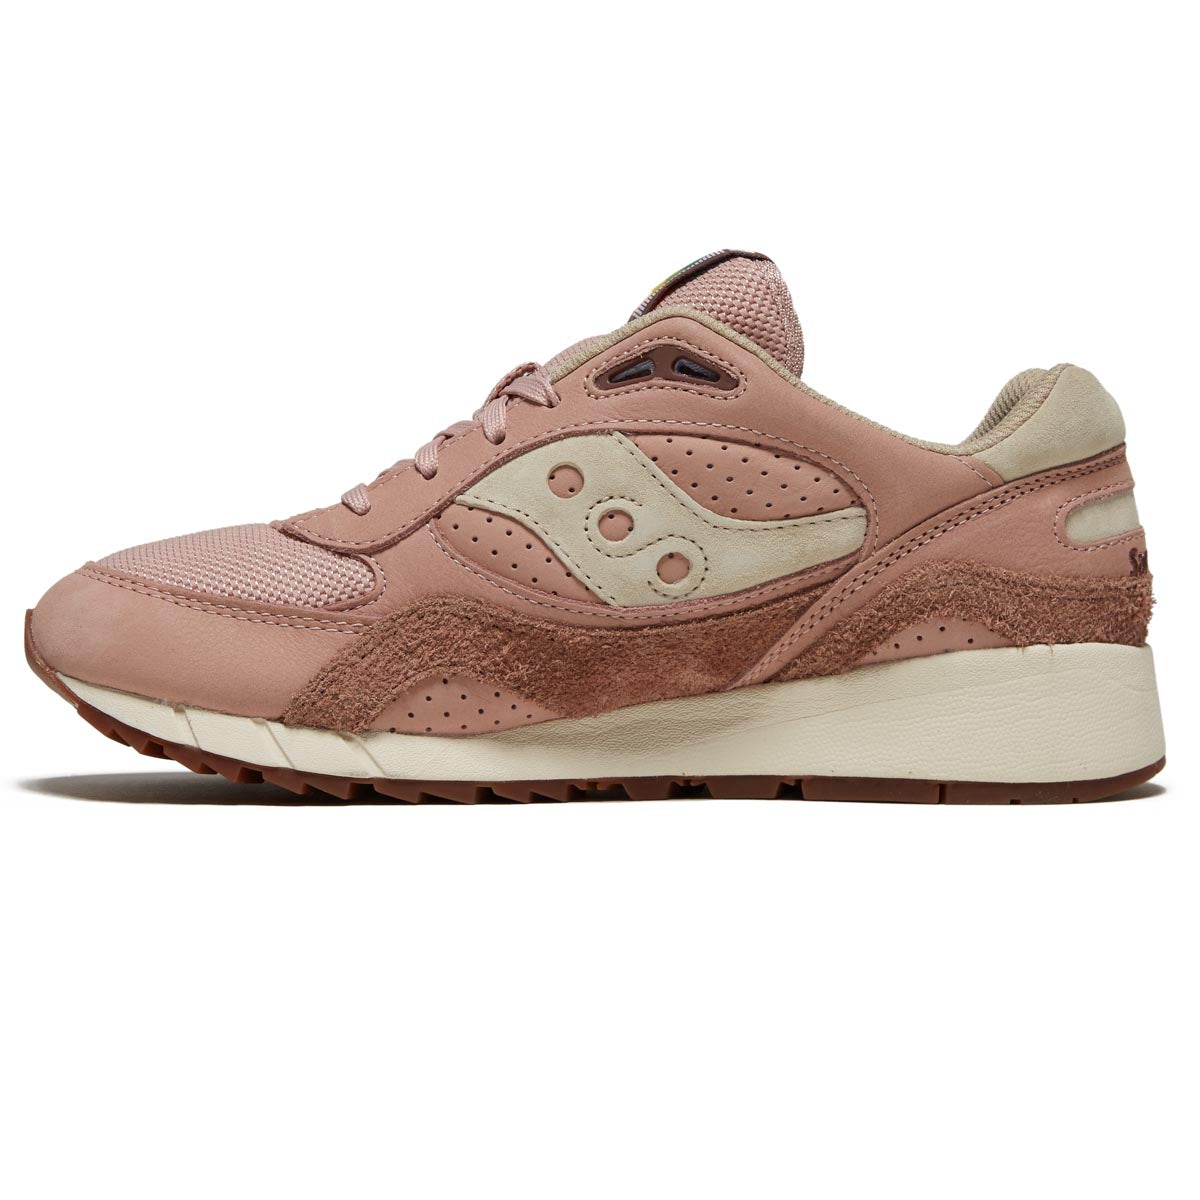 Saucony Shadow 6000 Shoes - Rose/Brown image 2